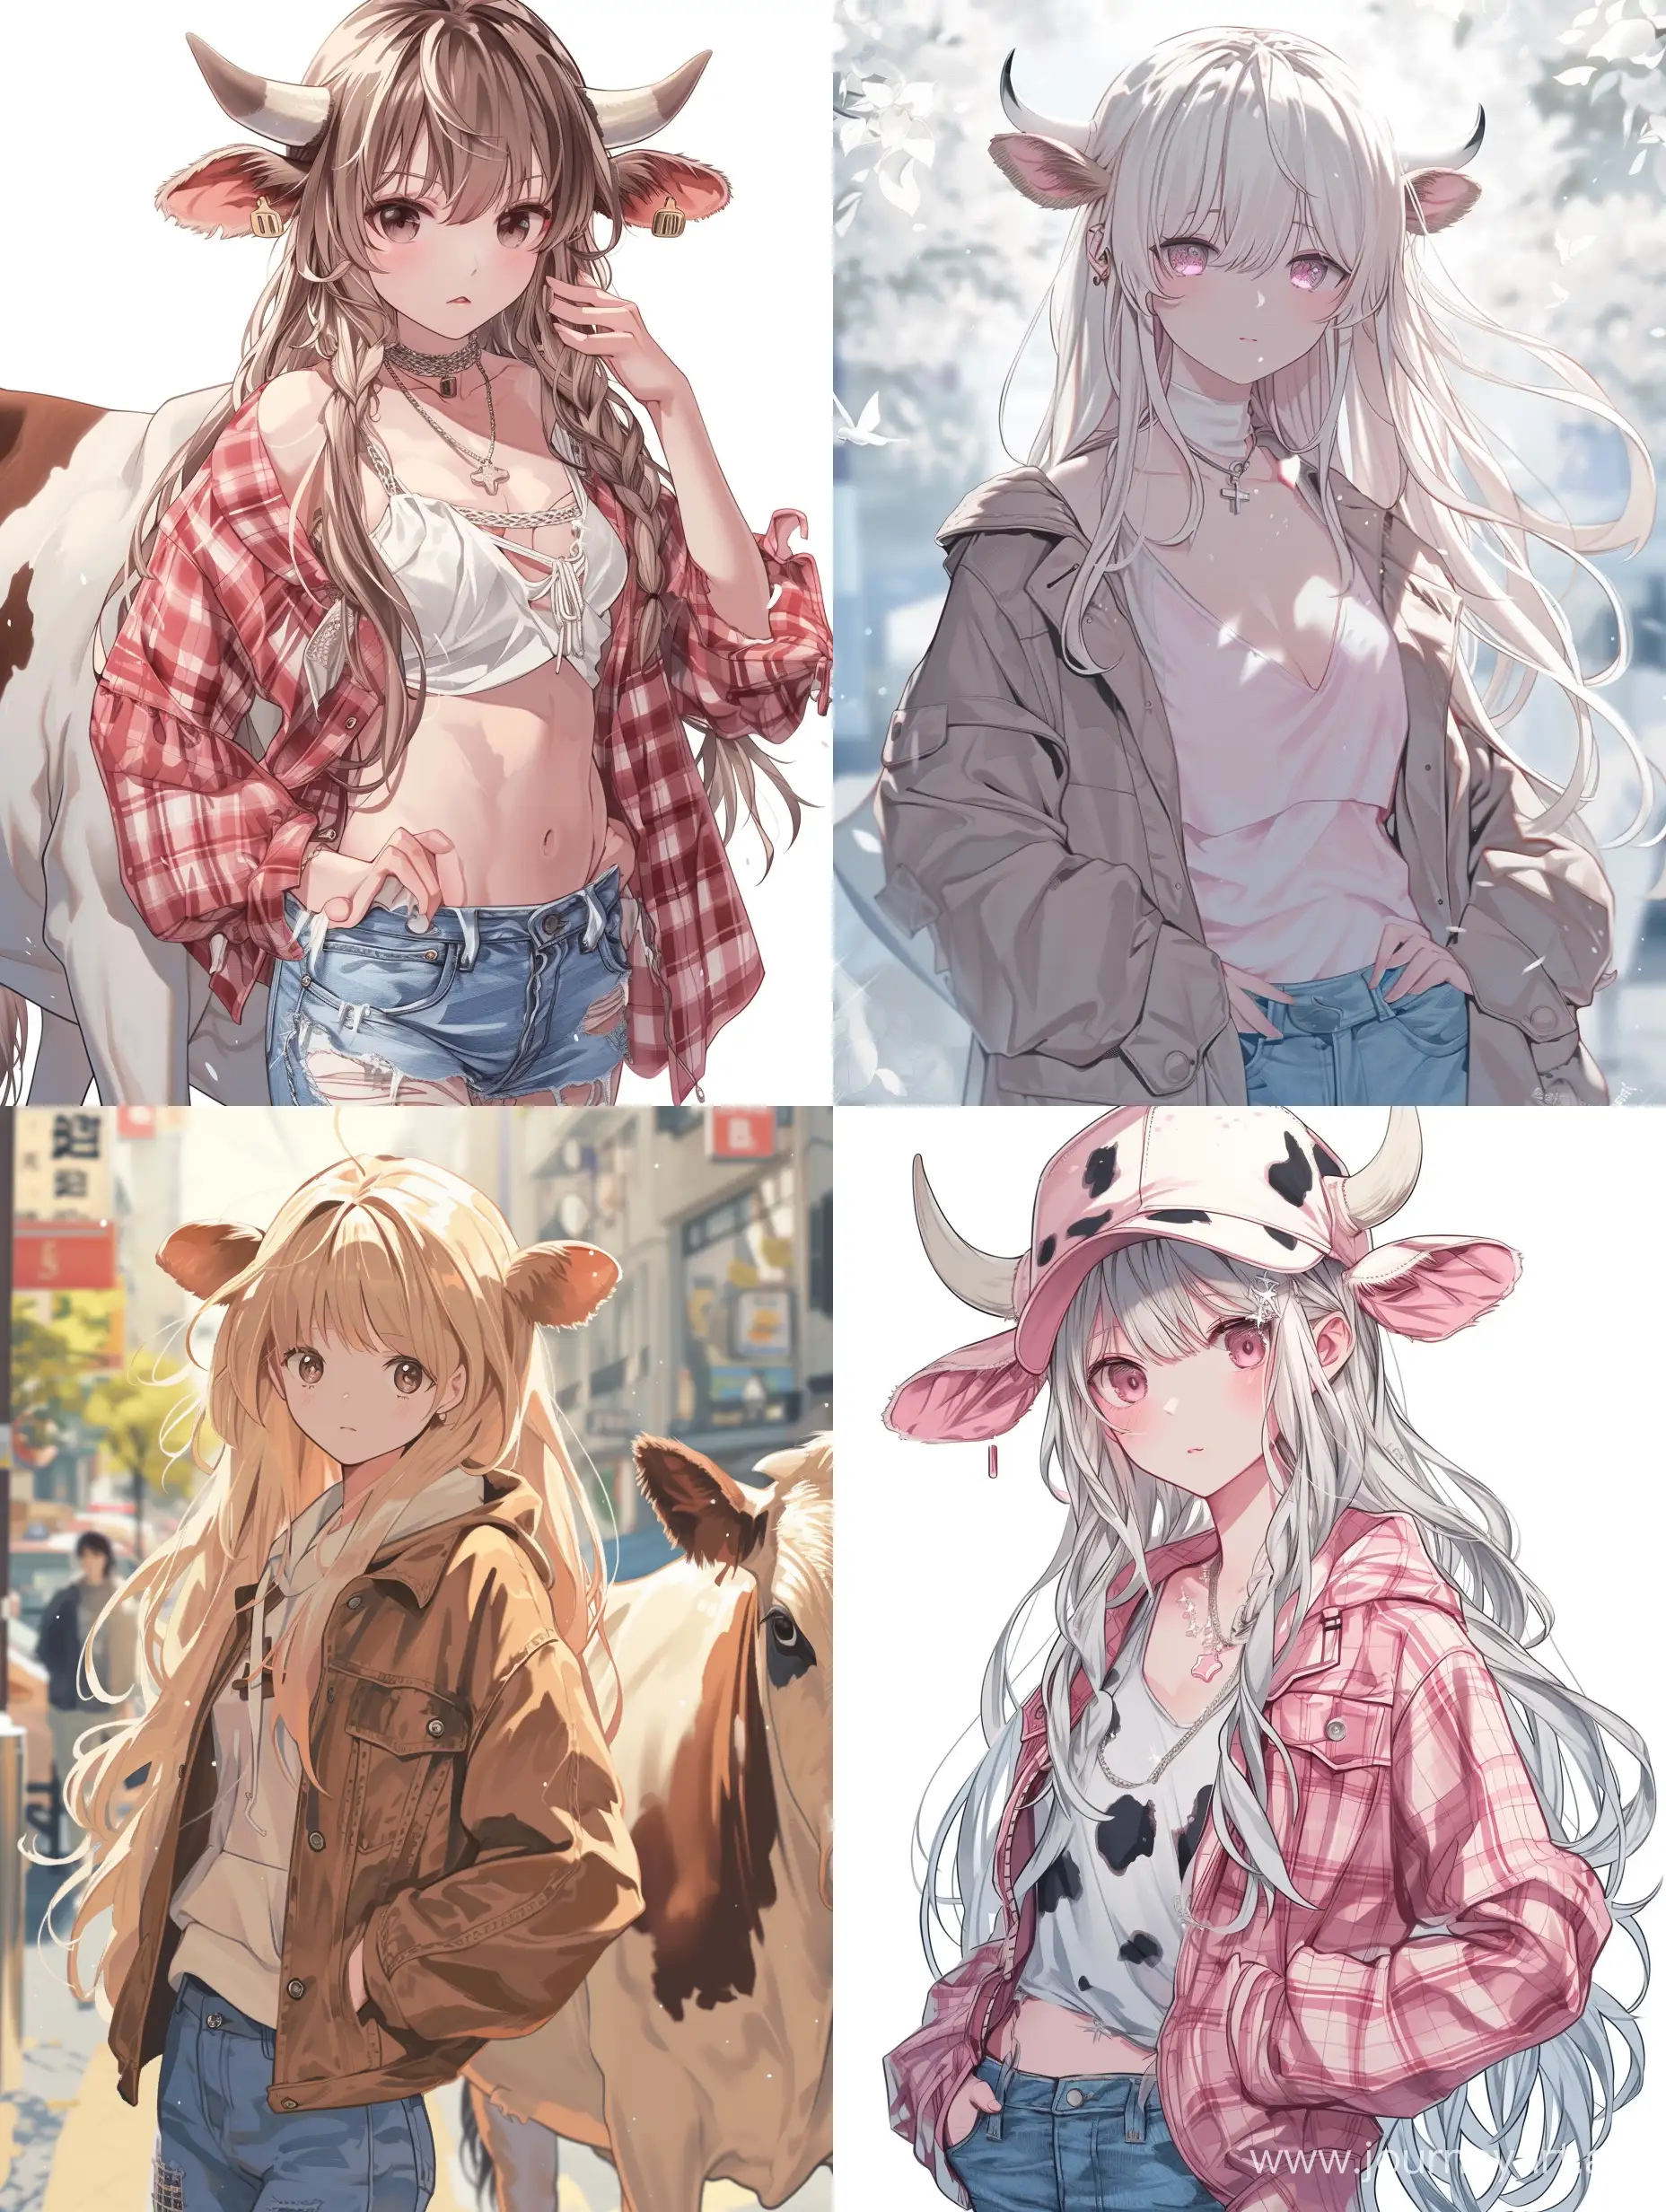 Charming-Anime-Girl-with-Long-Hair-and-Cow-in-Modern-Pastel-Ensemble